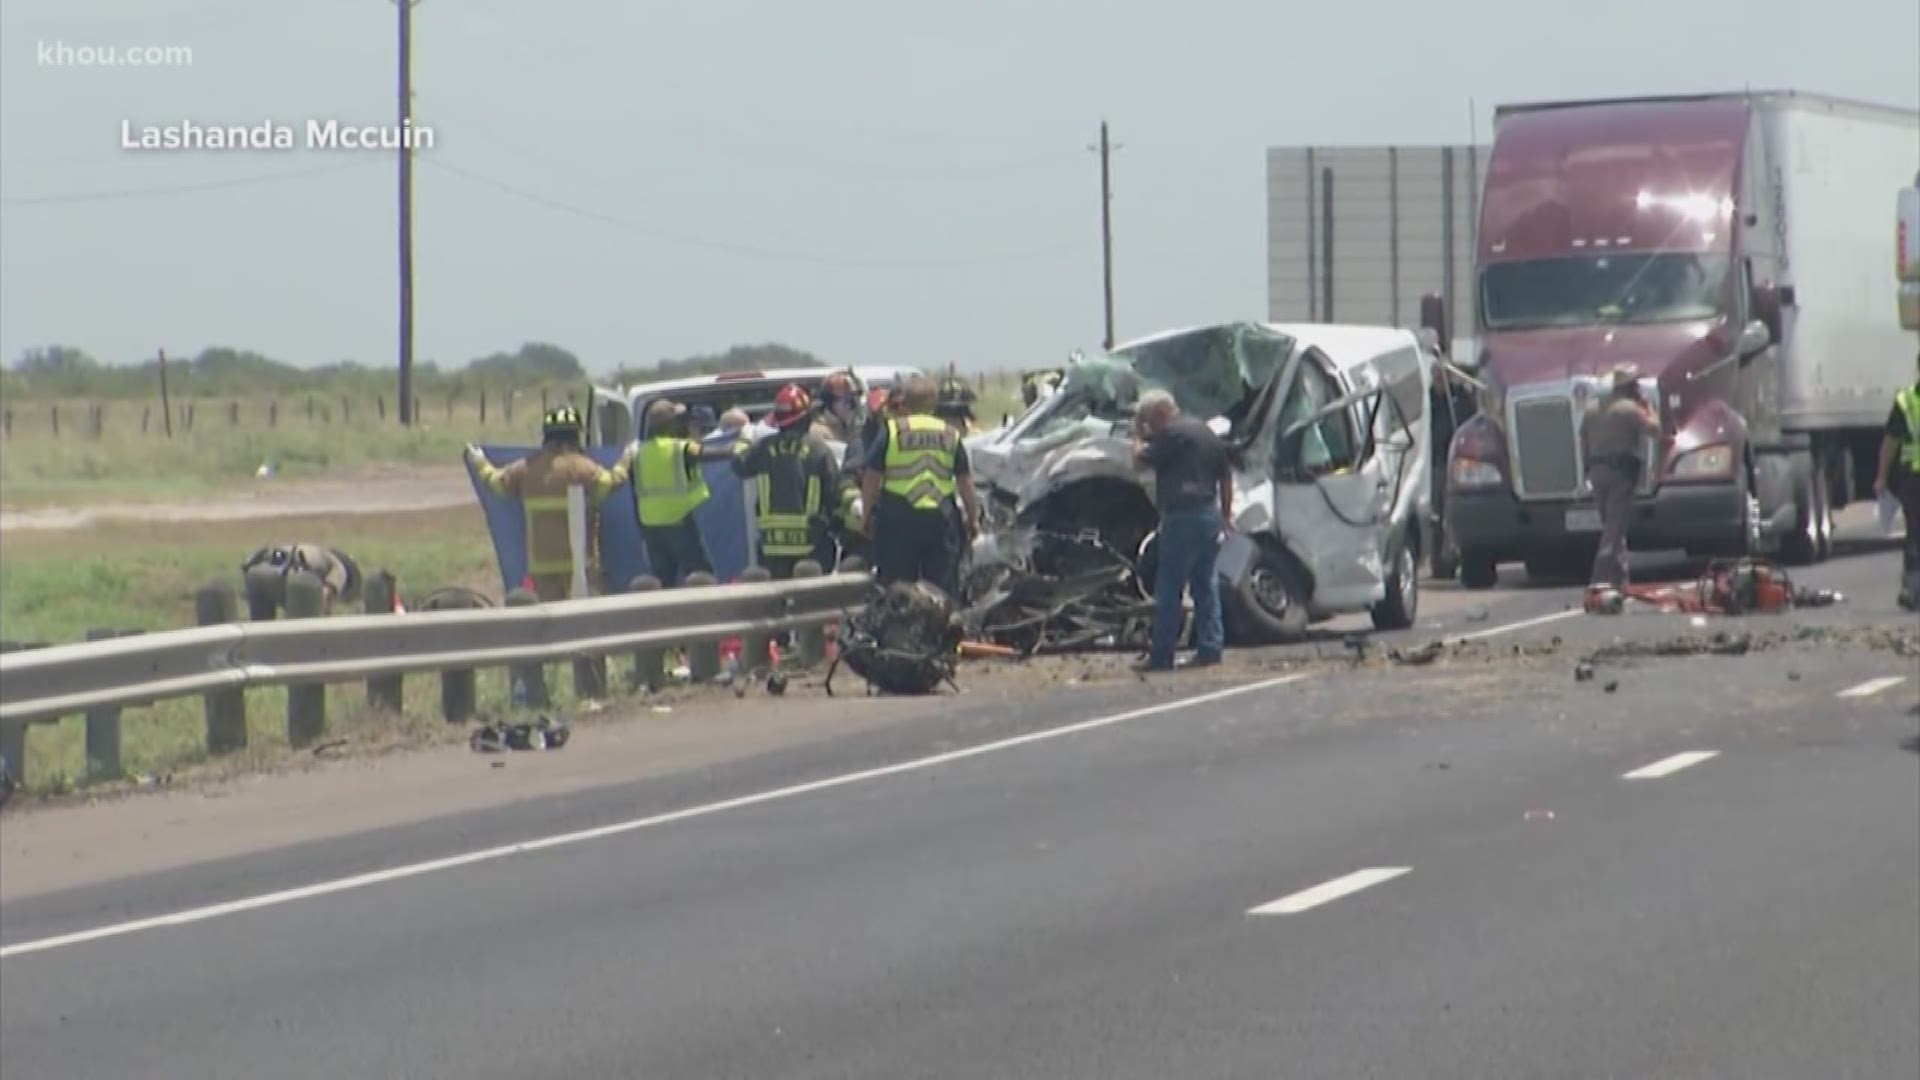 Five people are dead, including two children, after a passenger van slammed into an 18-wheeler then a pickup truck, according to the Texas Department of Public Safety.